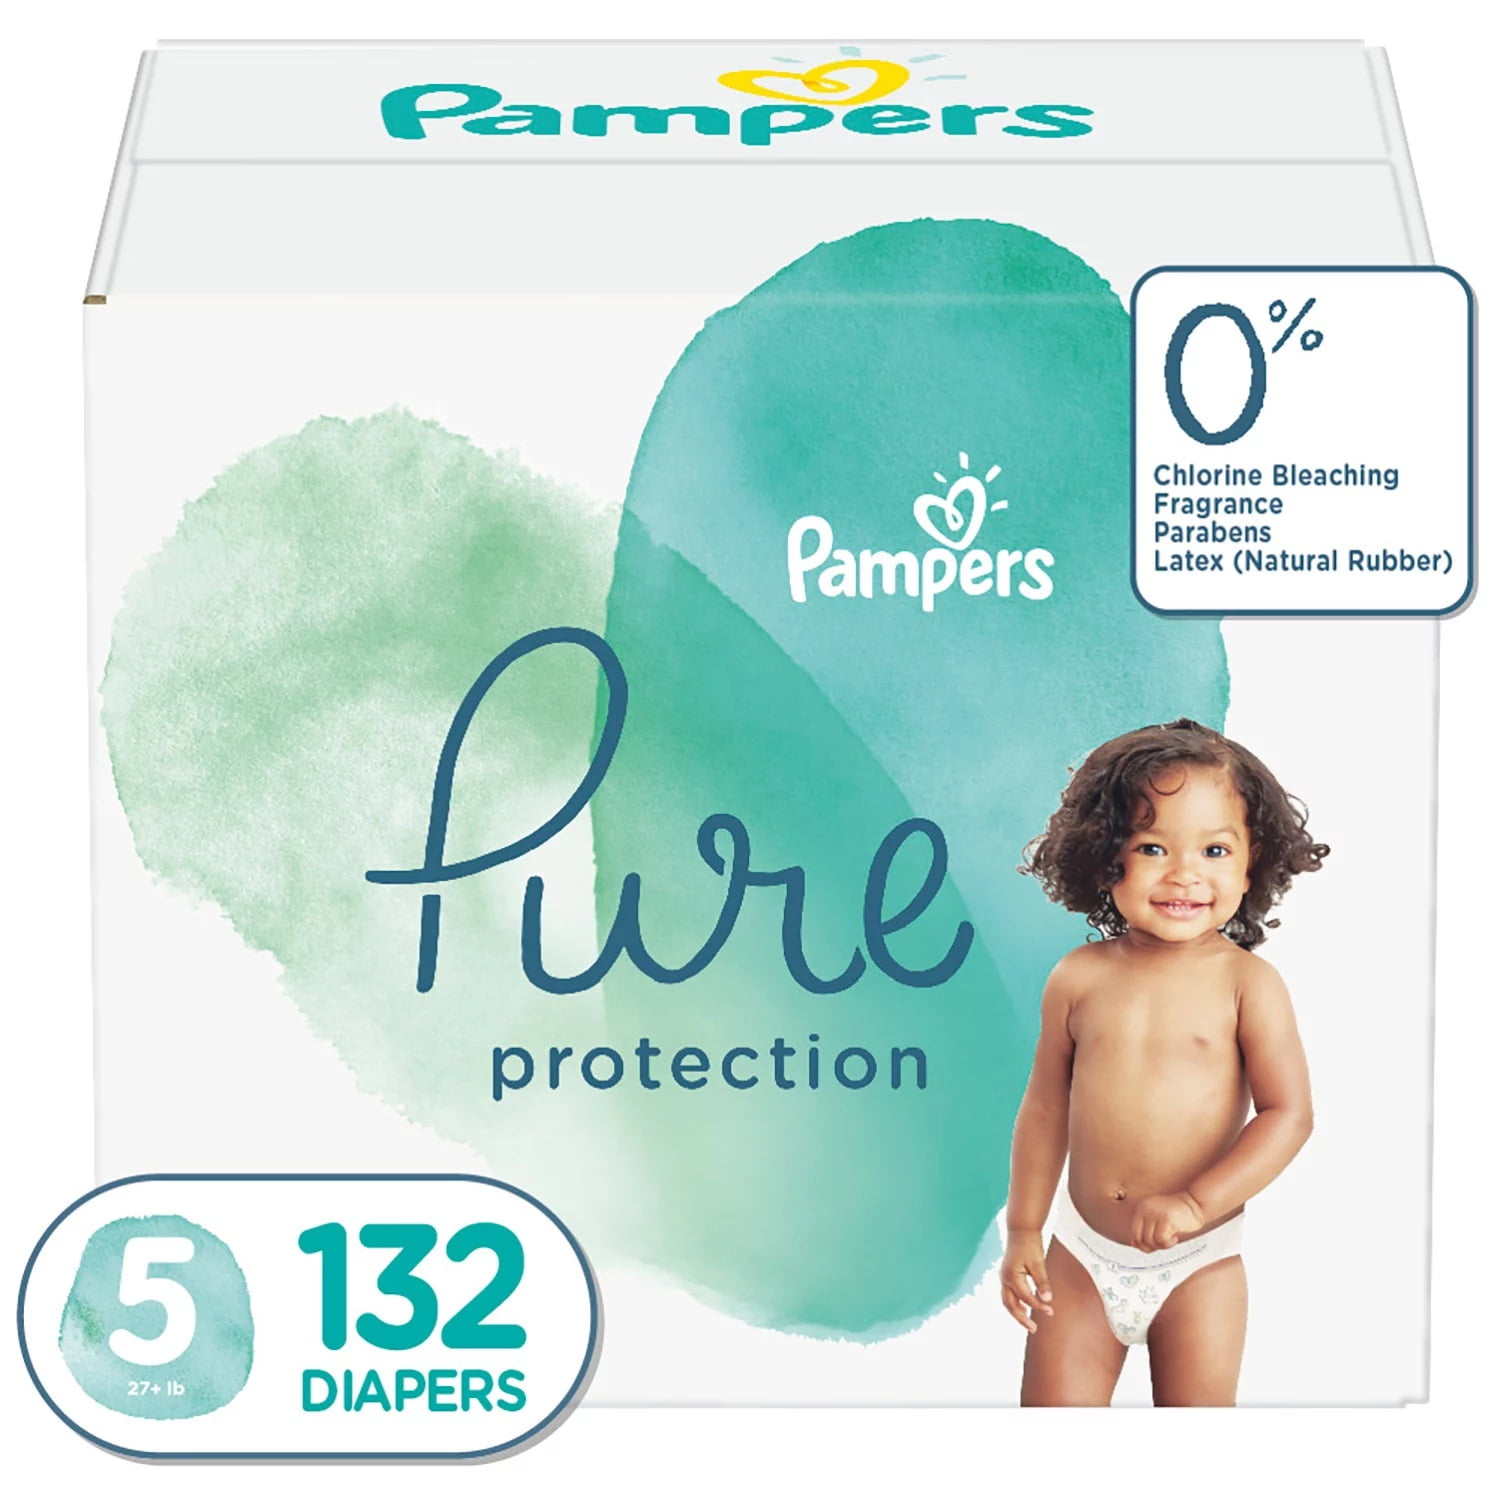 kg 11 830 g Couches Pampers Protection Pure Size 5